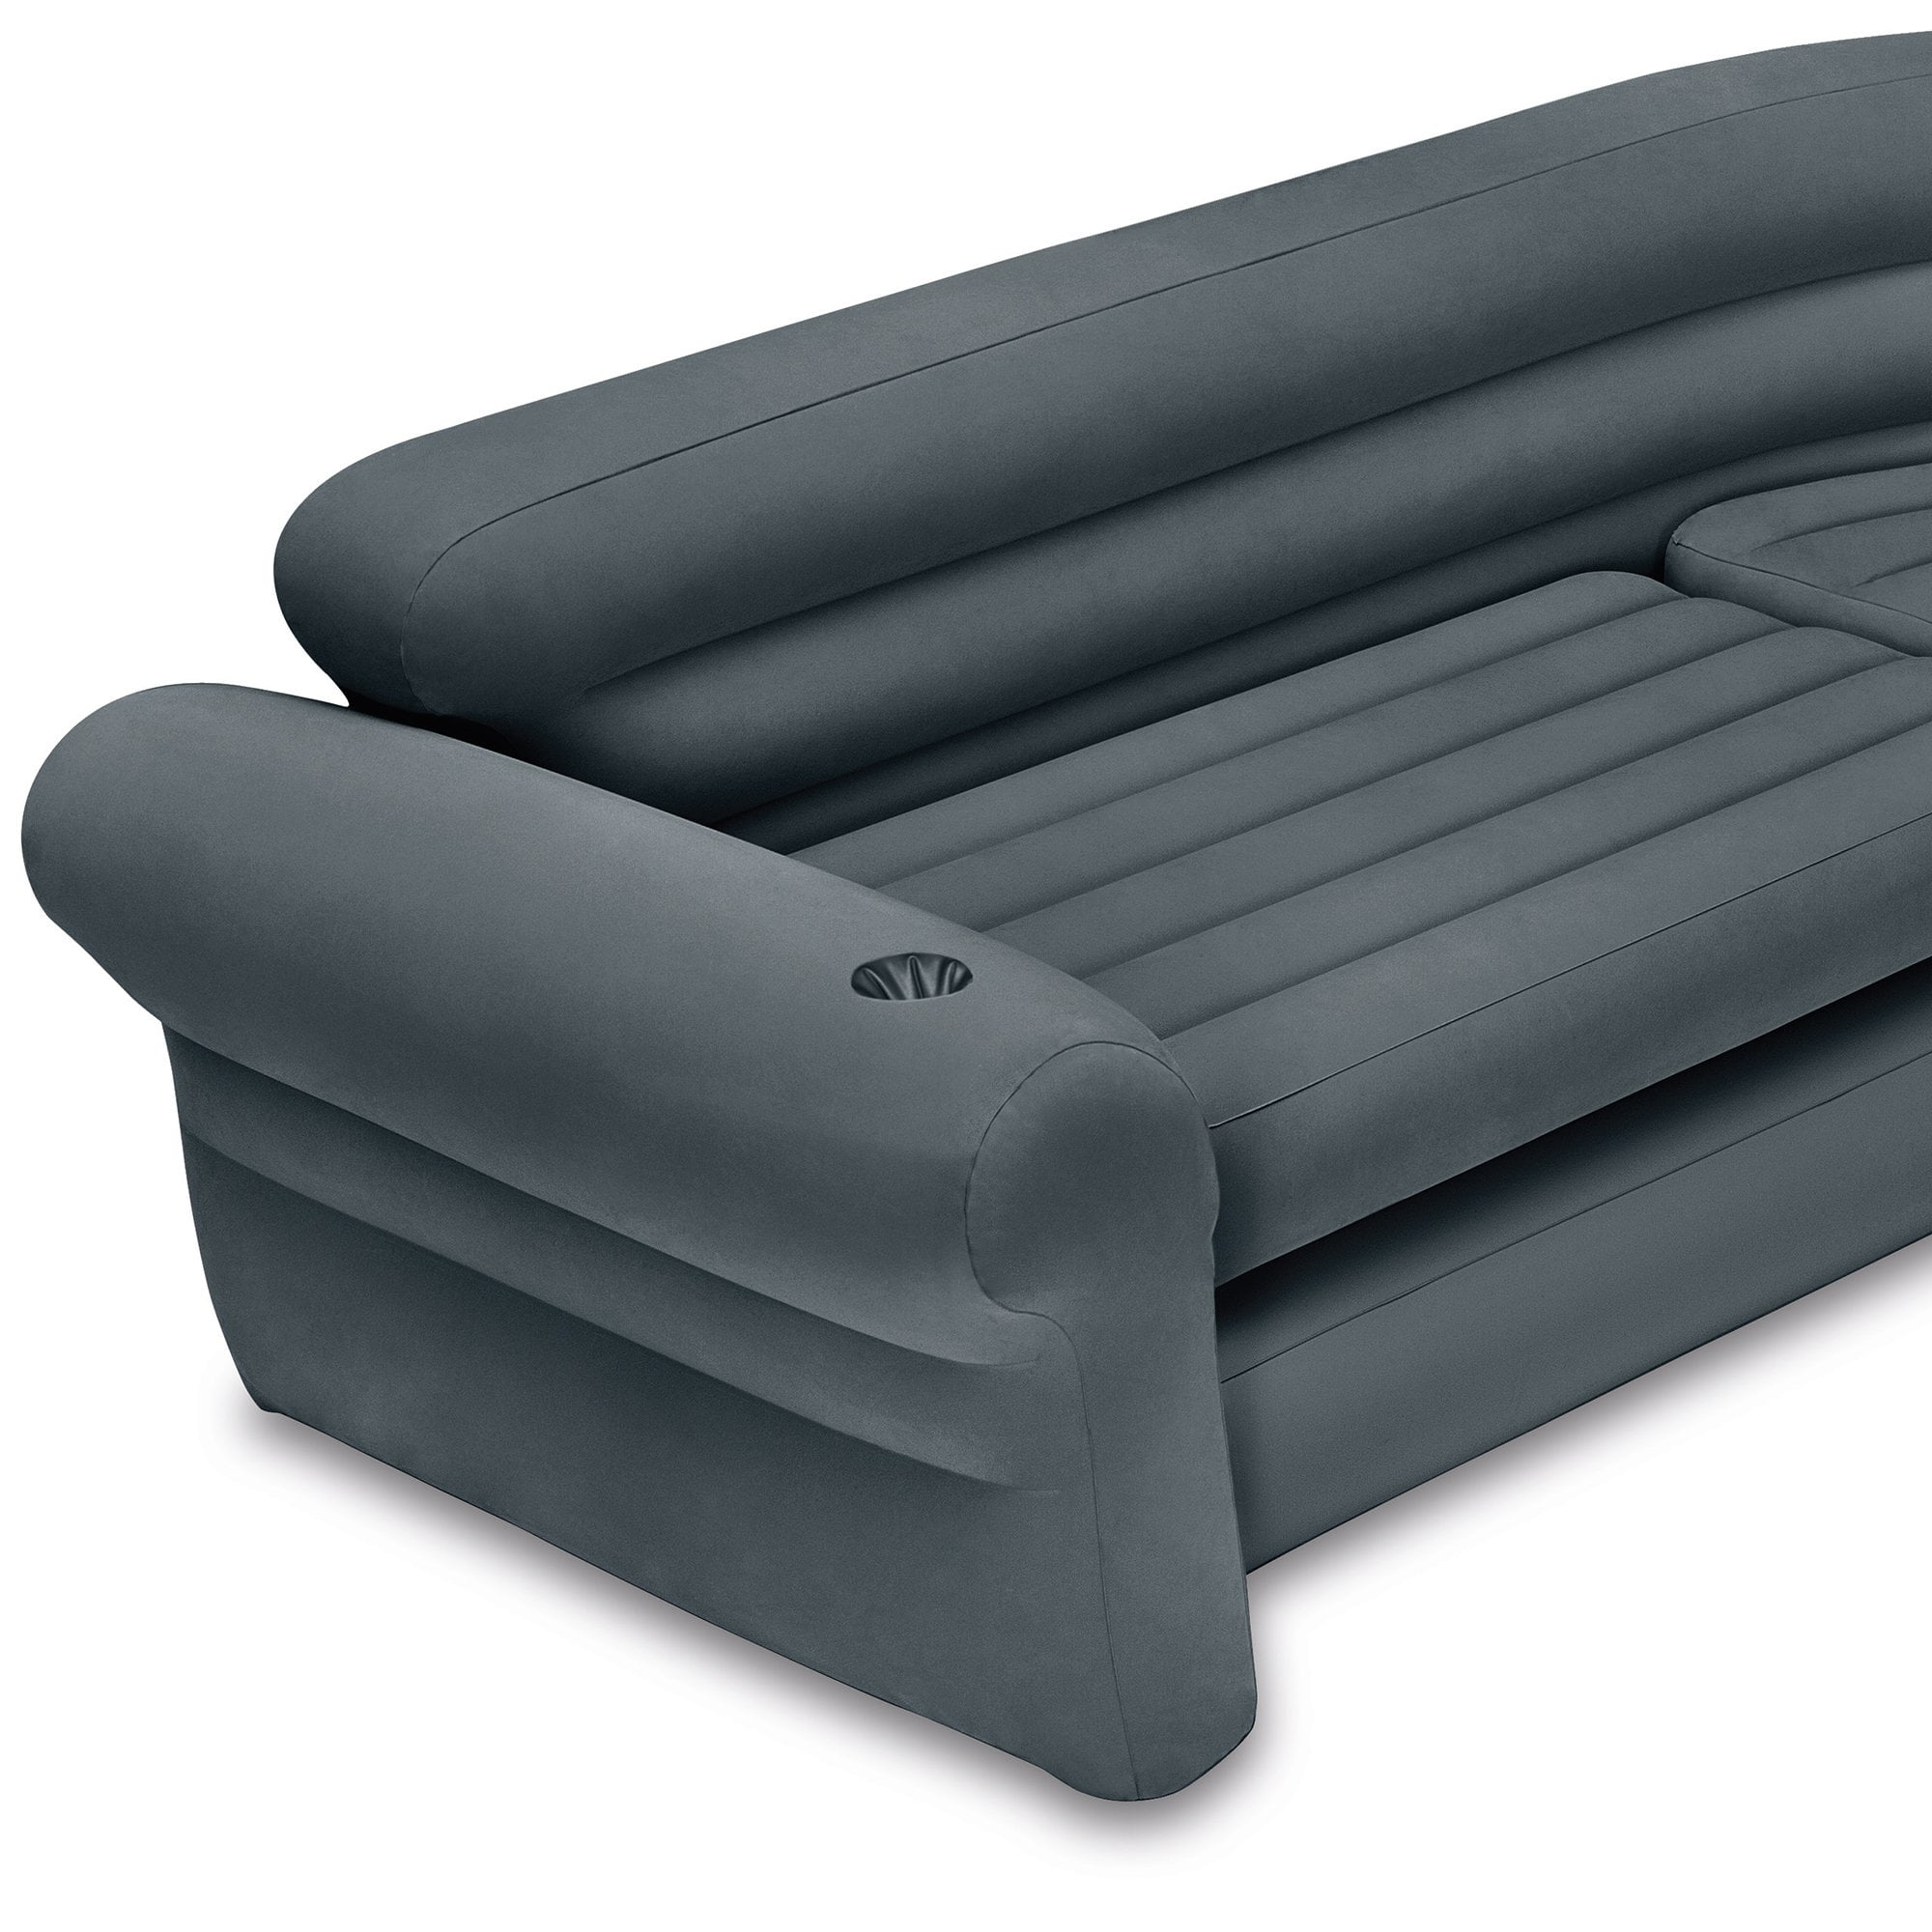 Trottoir genetisch Ieder Intex Corner Sofa L-Shaped Inflatable Home Lounge Couch with Cupholders -  Walmart.com